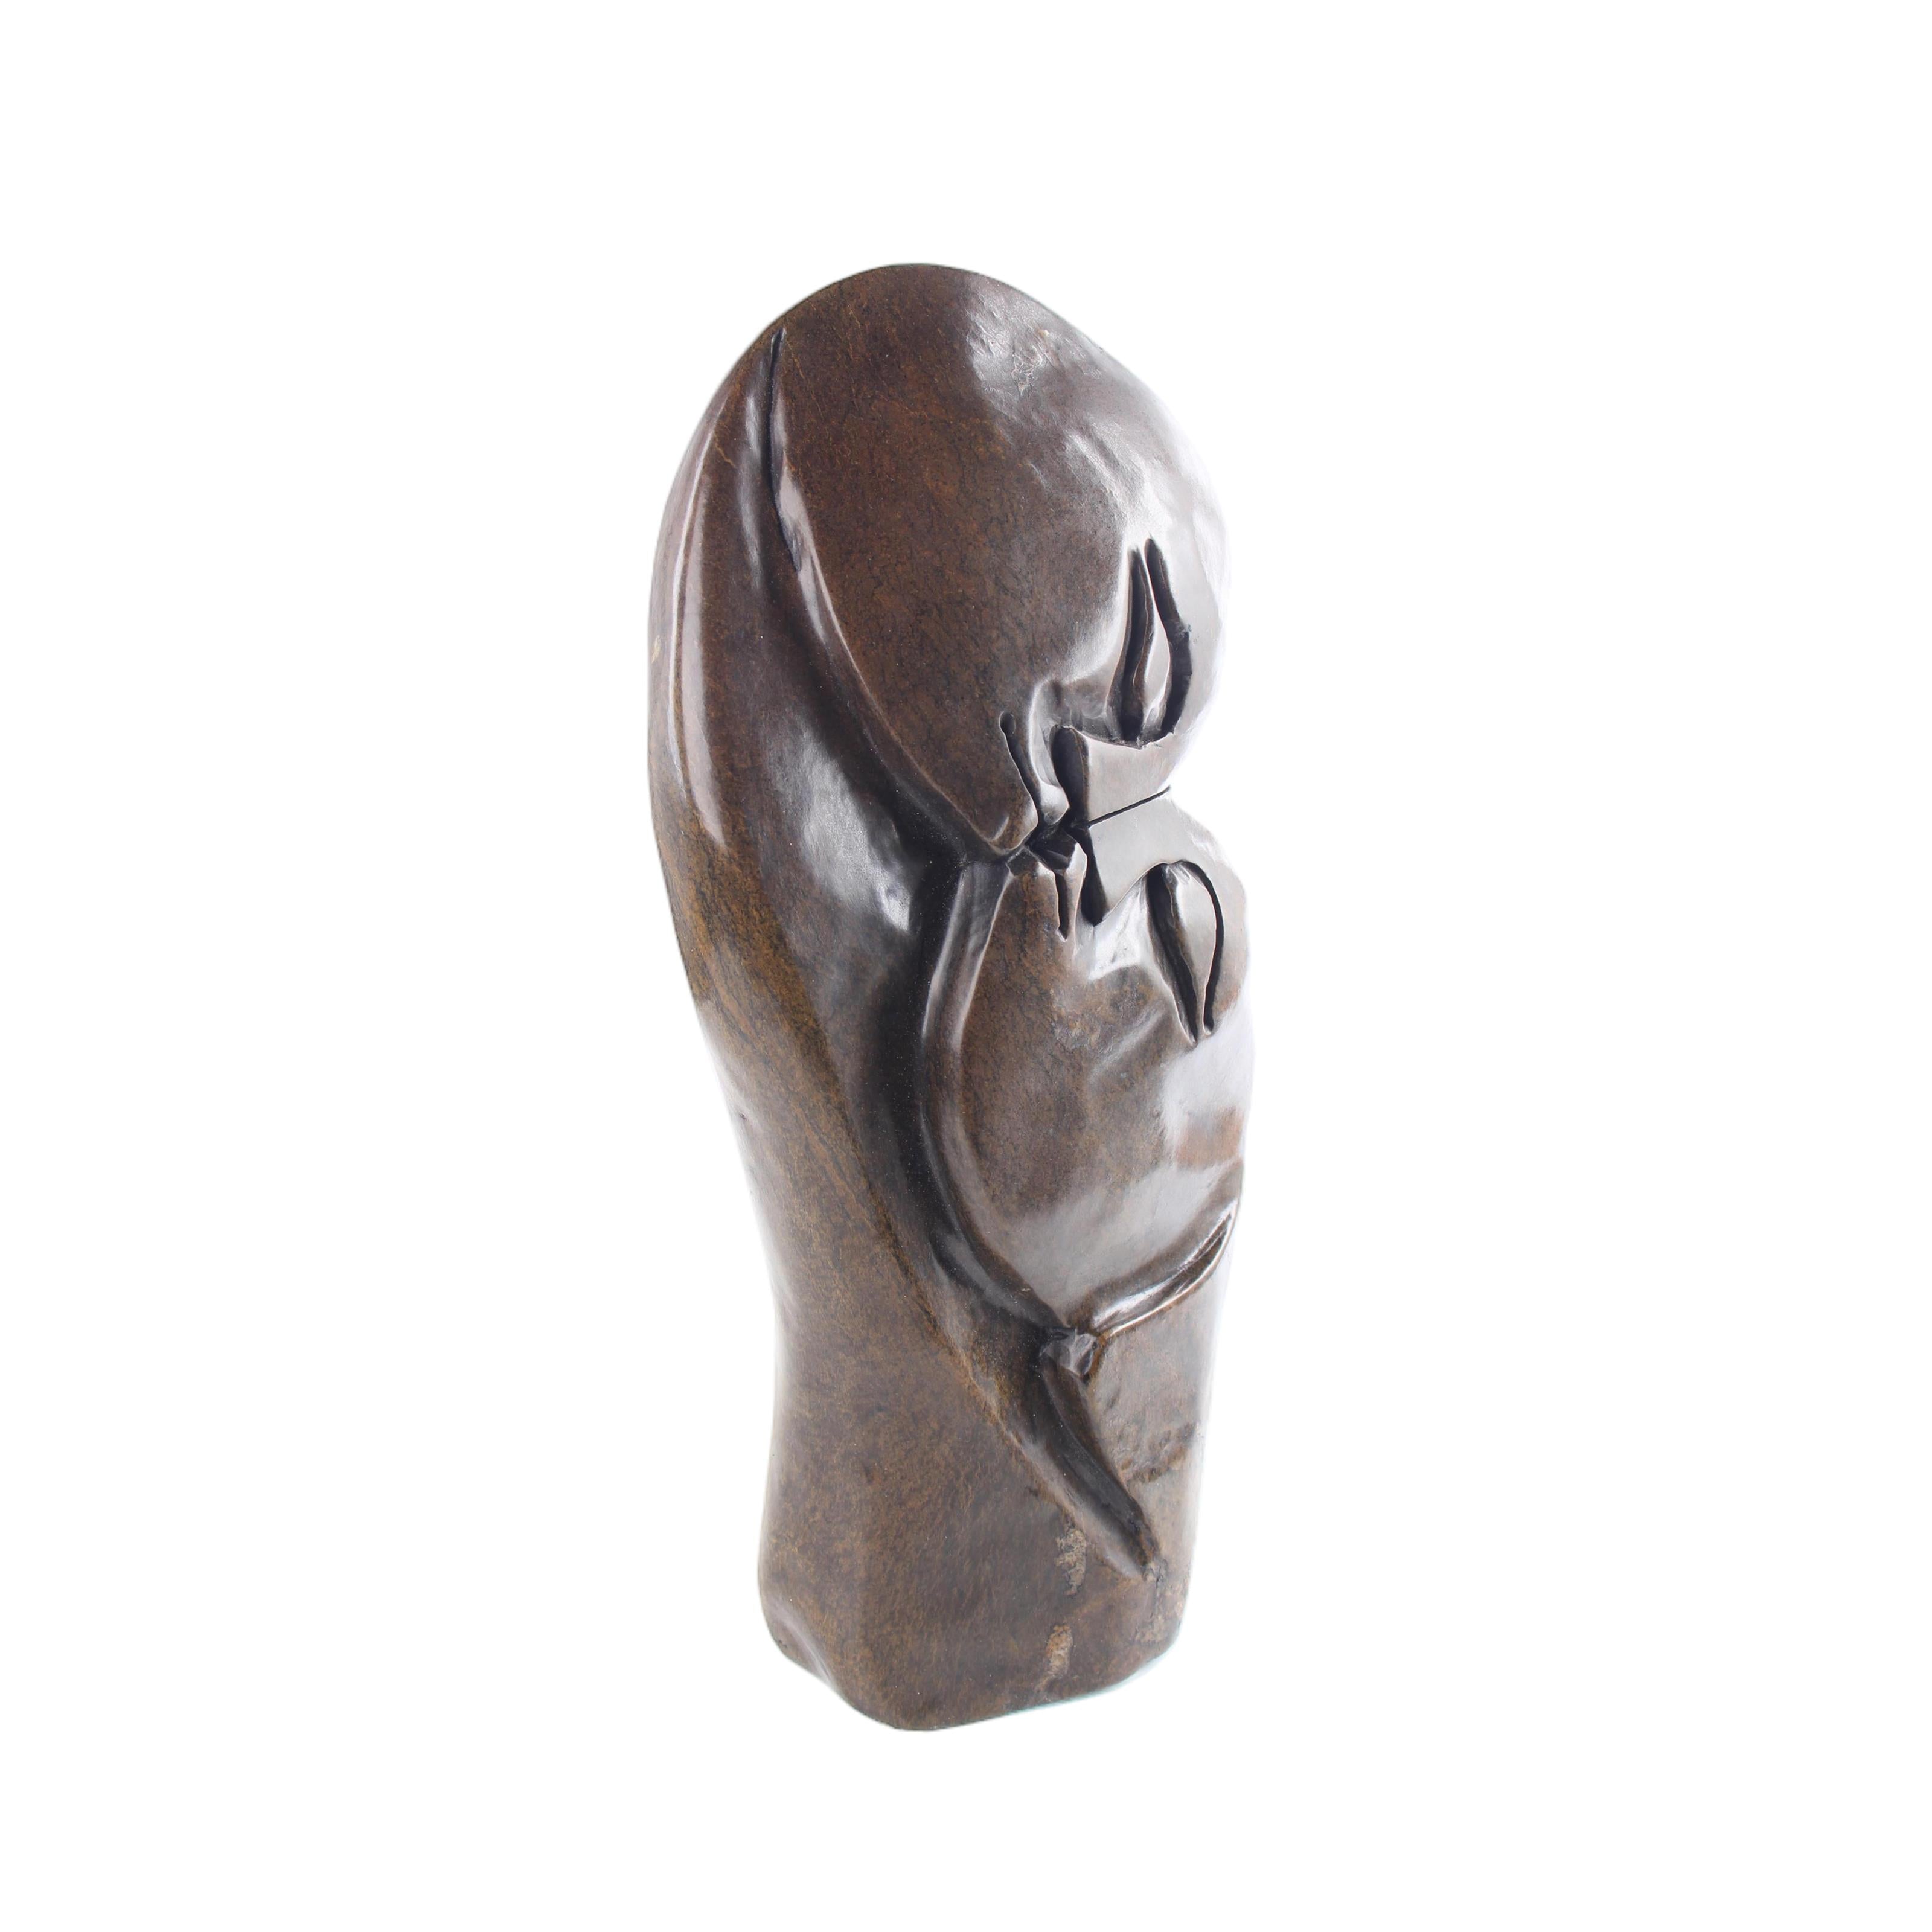 Shona Tribe Serpentine Stone Lovers ~15.4" Tall - Lovers